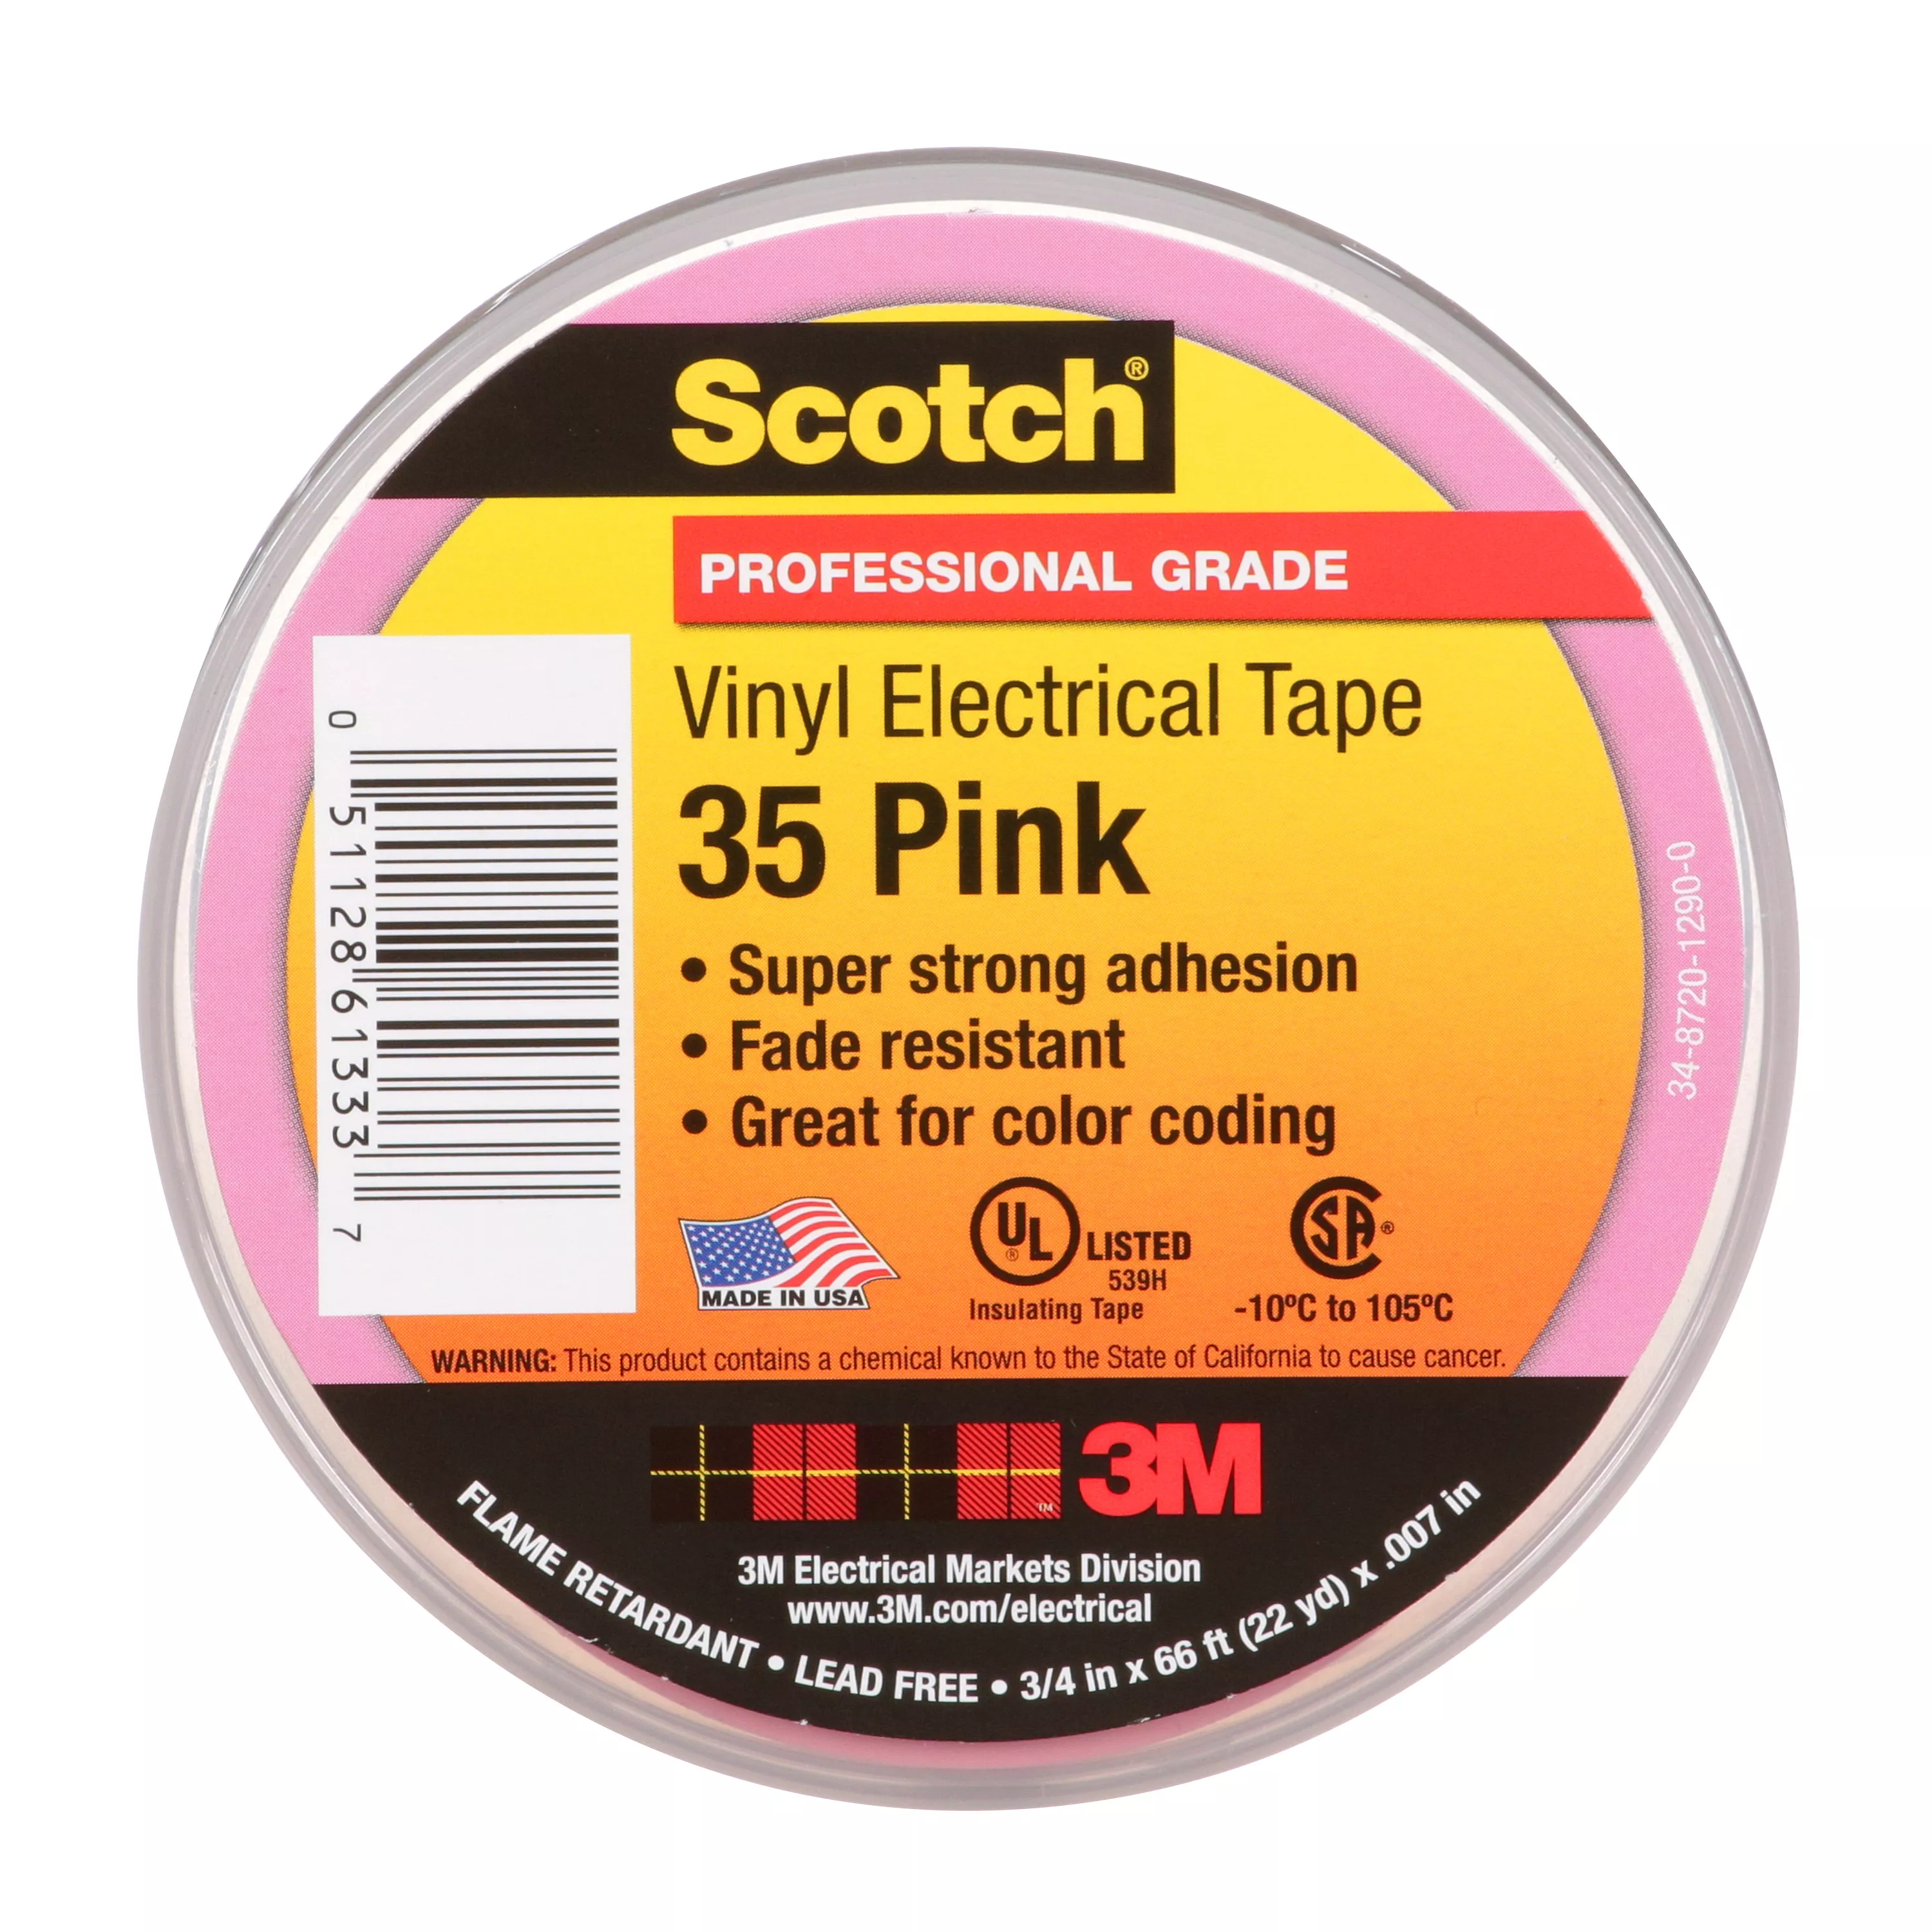 Scotch® Vinyl Color Coding Electrical Tape 35, 3/4 in x 66 ft, Pink, 10
rolls/carton, 100 rolls/Case